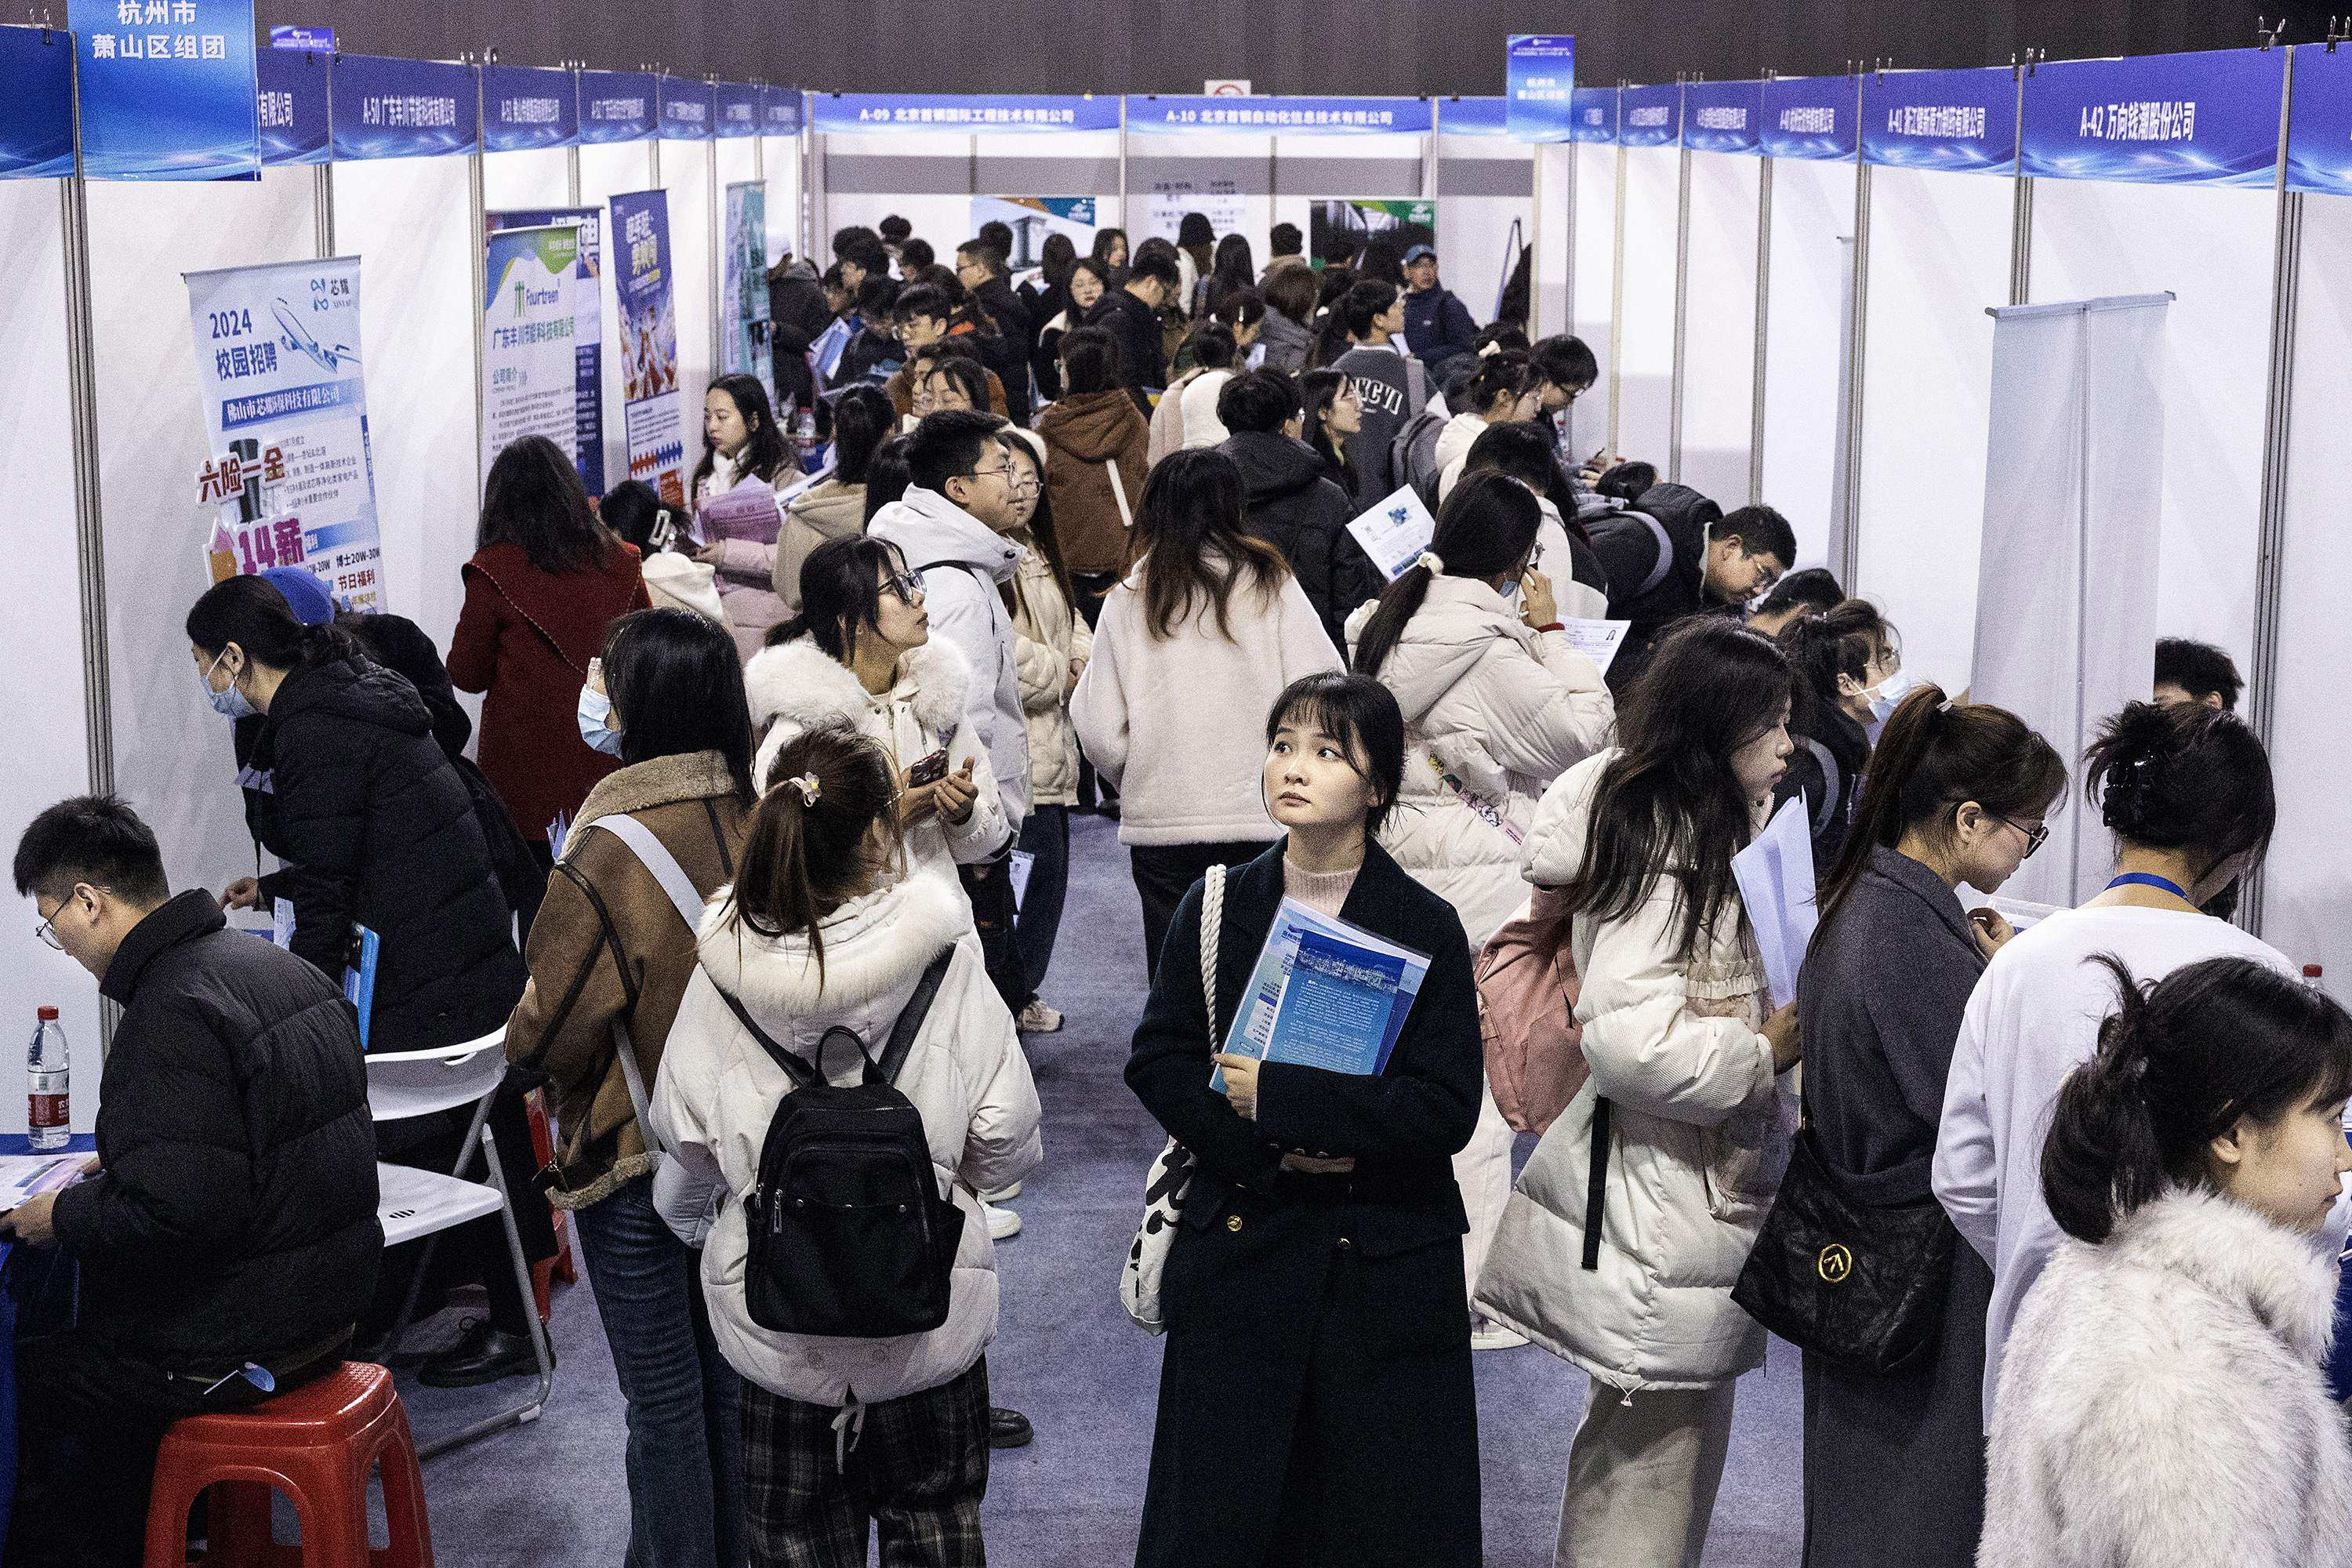 University students attend a job fair in Wuhan, in central China’s Hubei province, on March 6. Photo: AFP